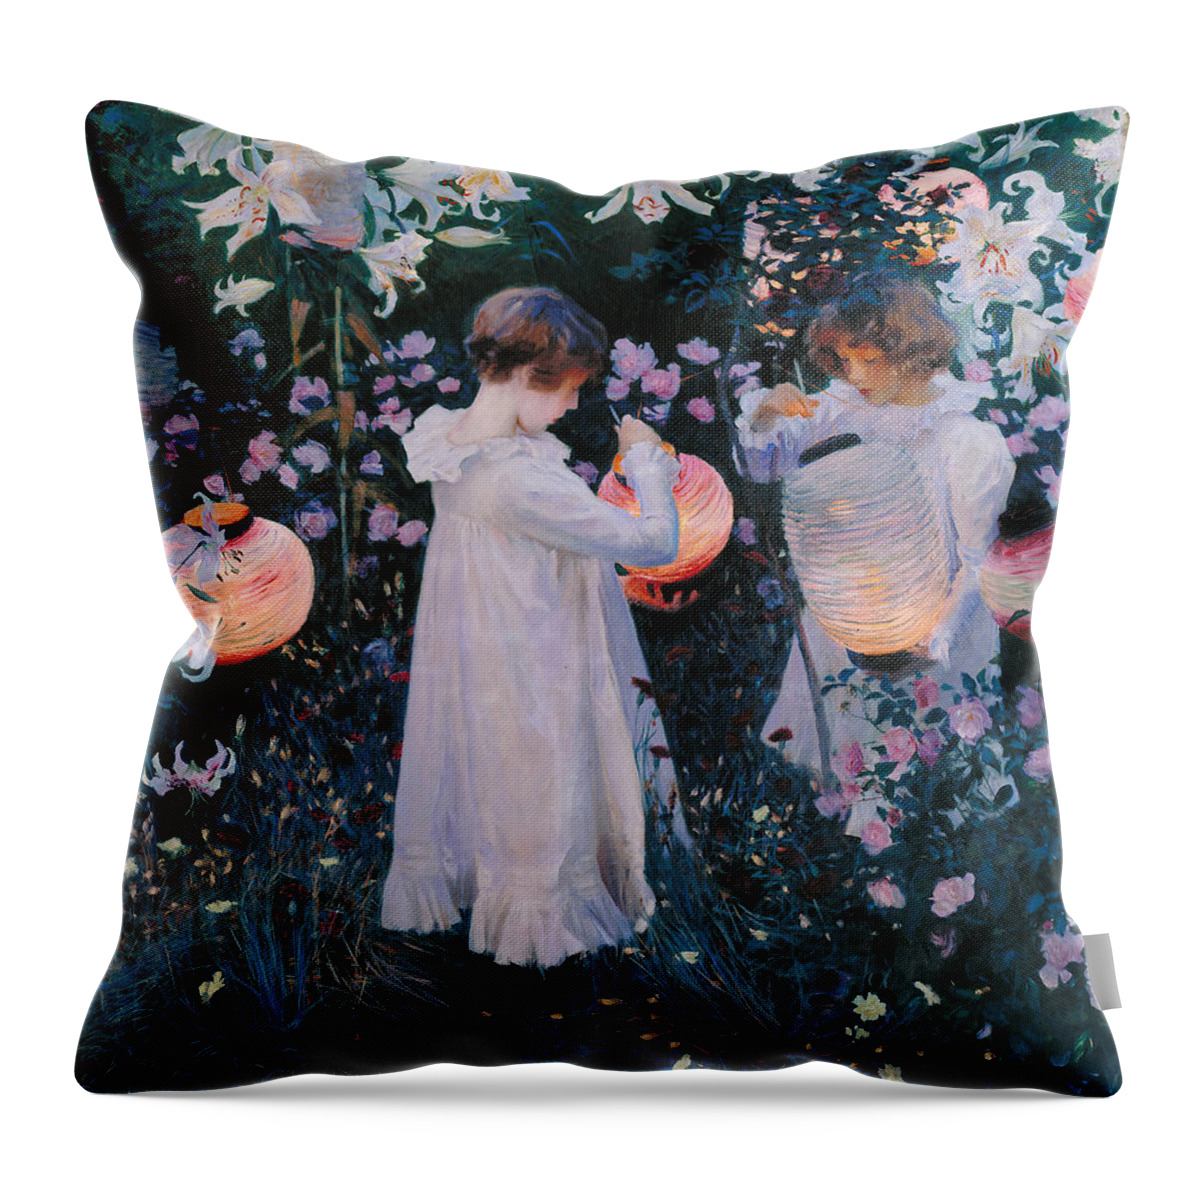 Carnation Lily Lily Rose By John Singer Sargent Throw Pillow featuring the painting Carnation, Lily, Lily, Rose #9 by John Singer Sargent